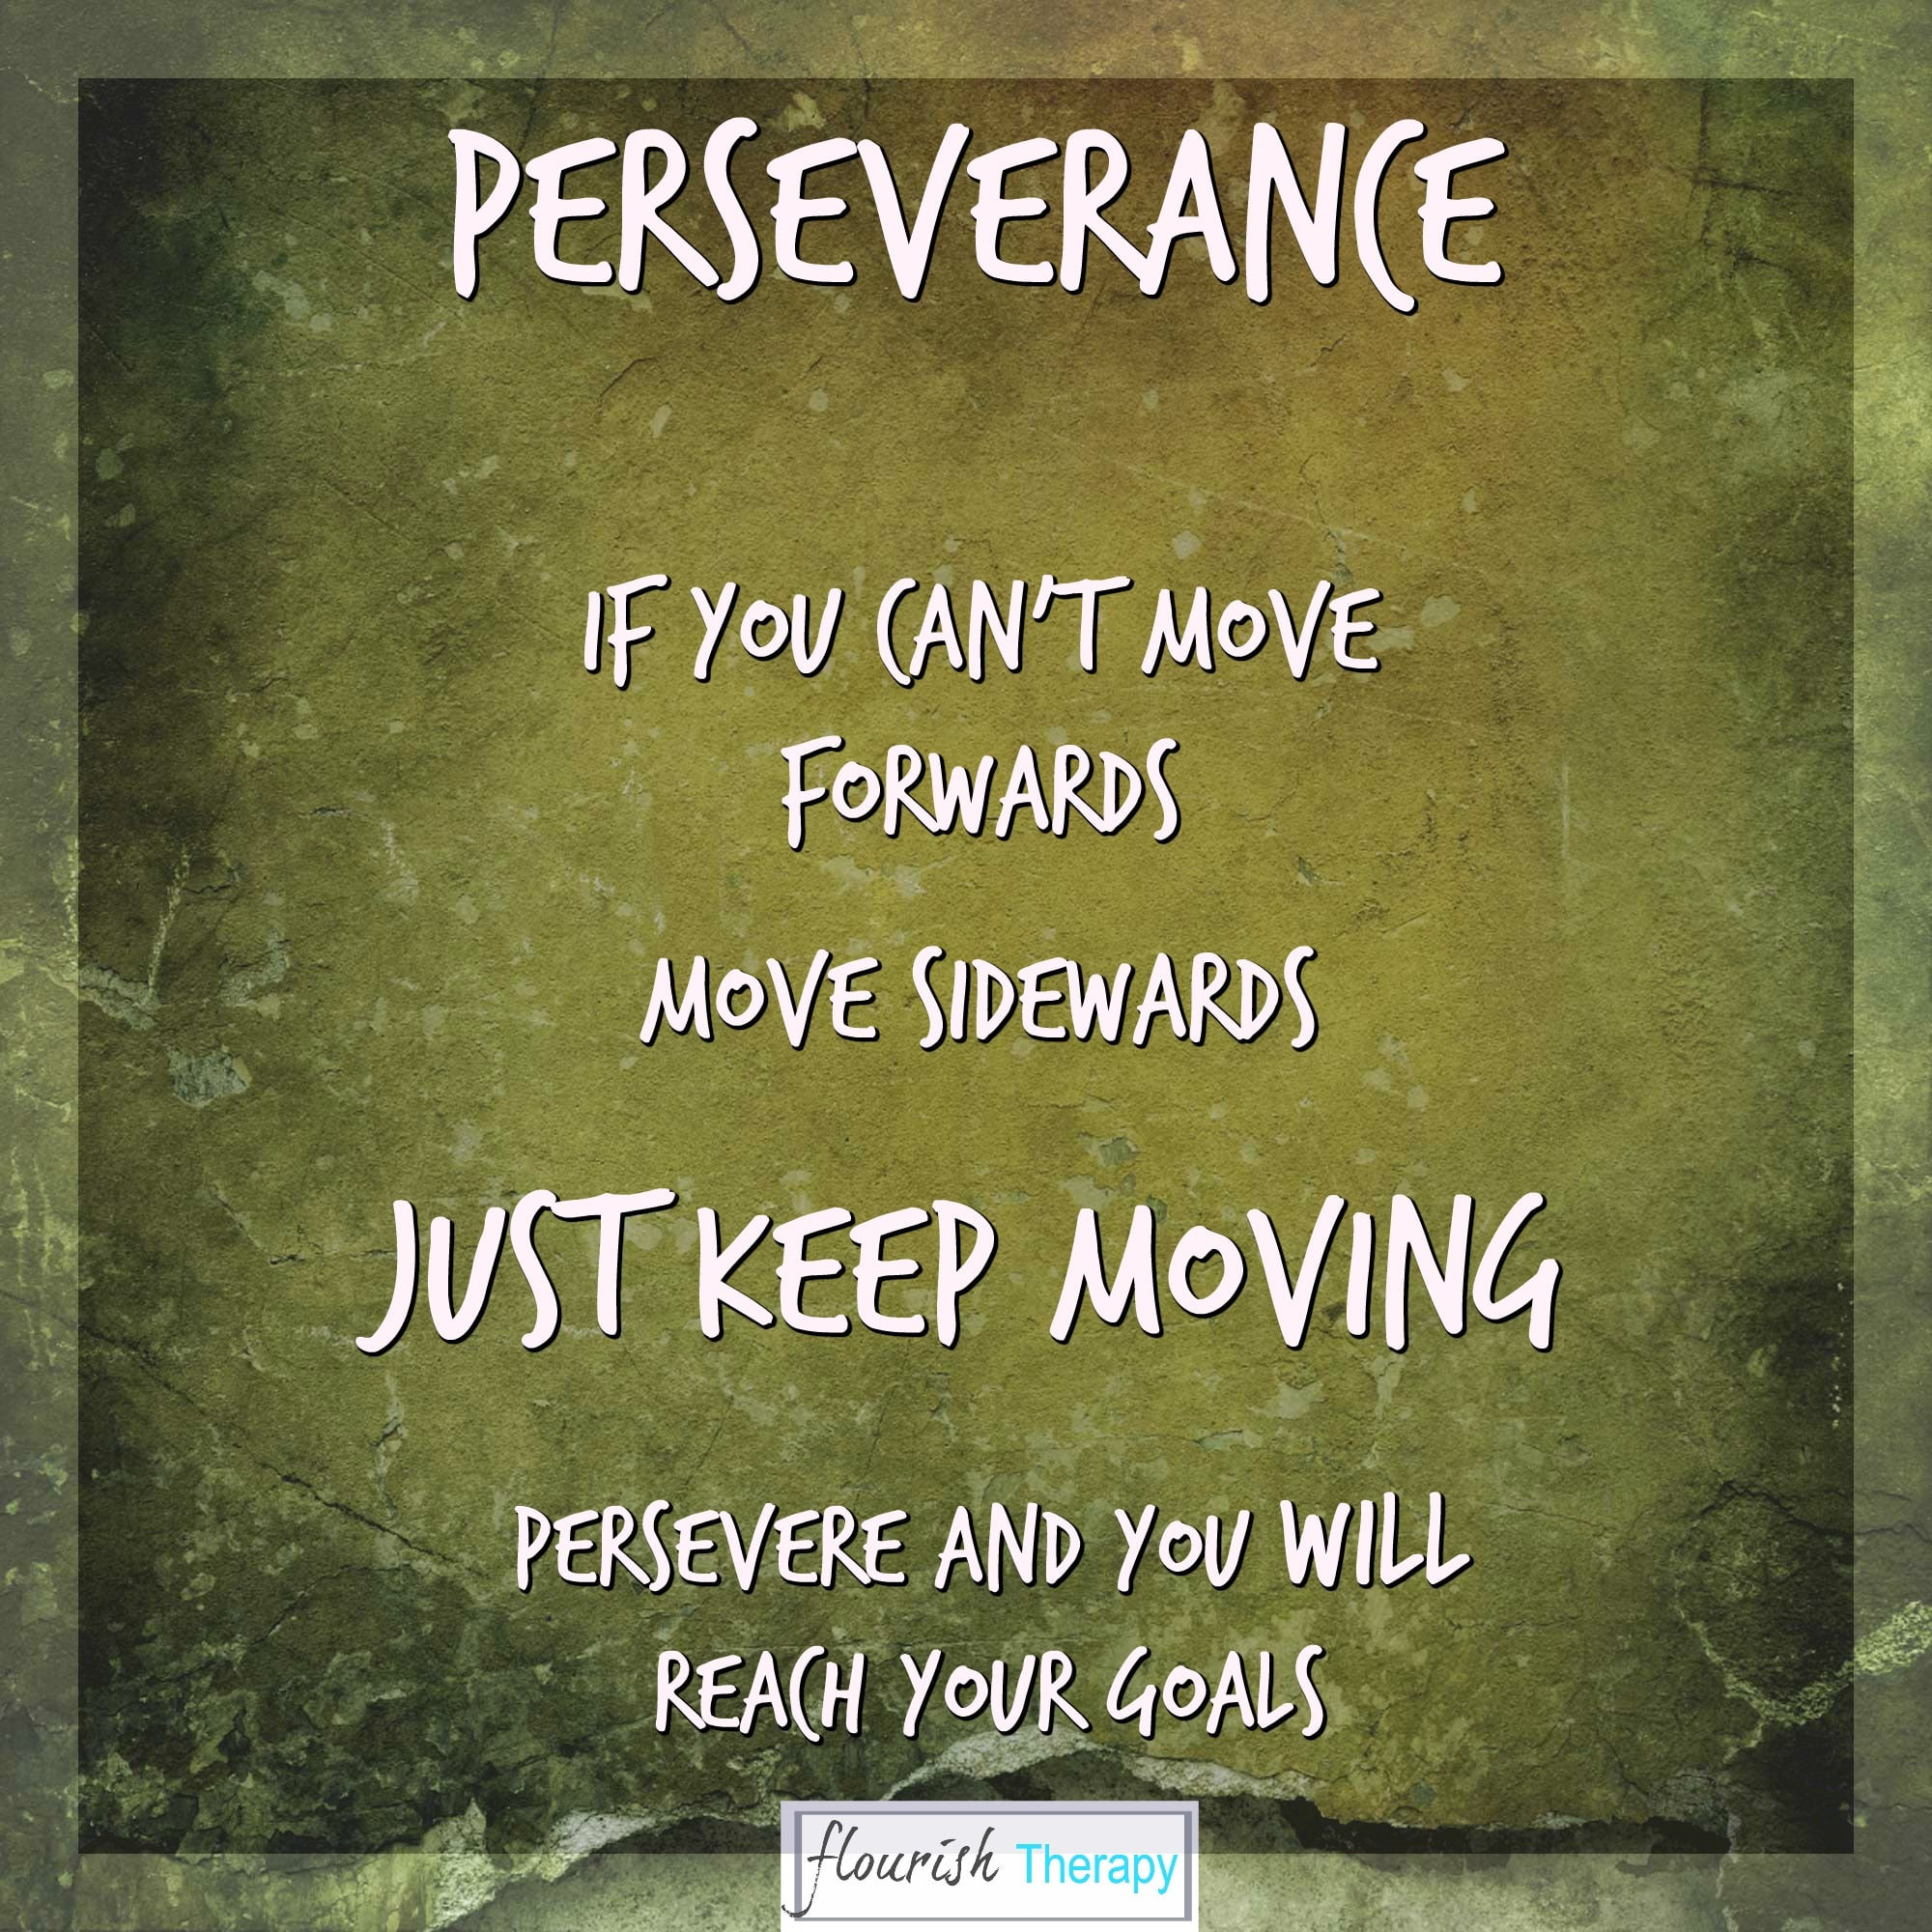 Inspirational Quotes About Perseverance
 Inspirational Quotes